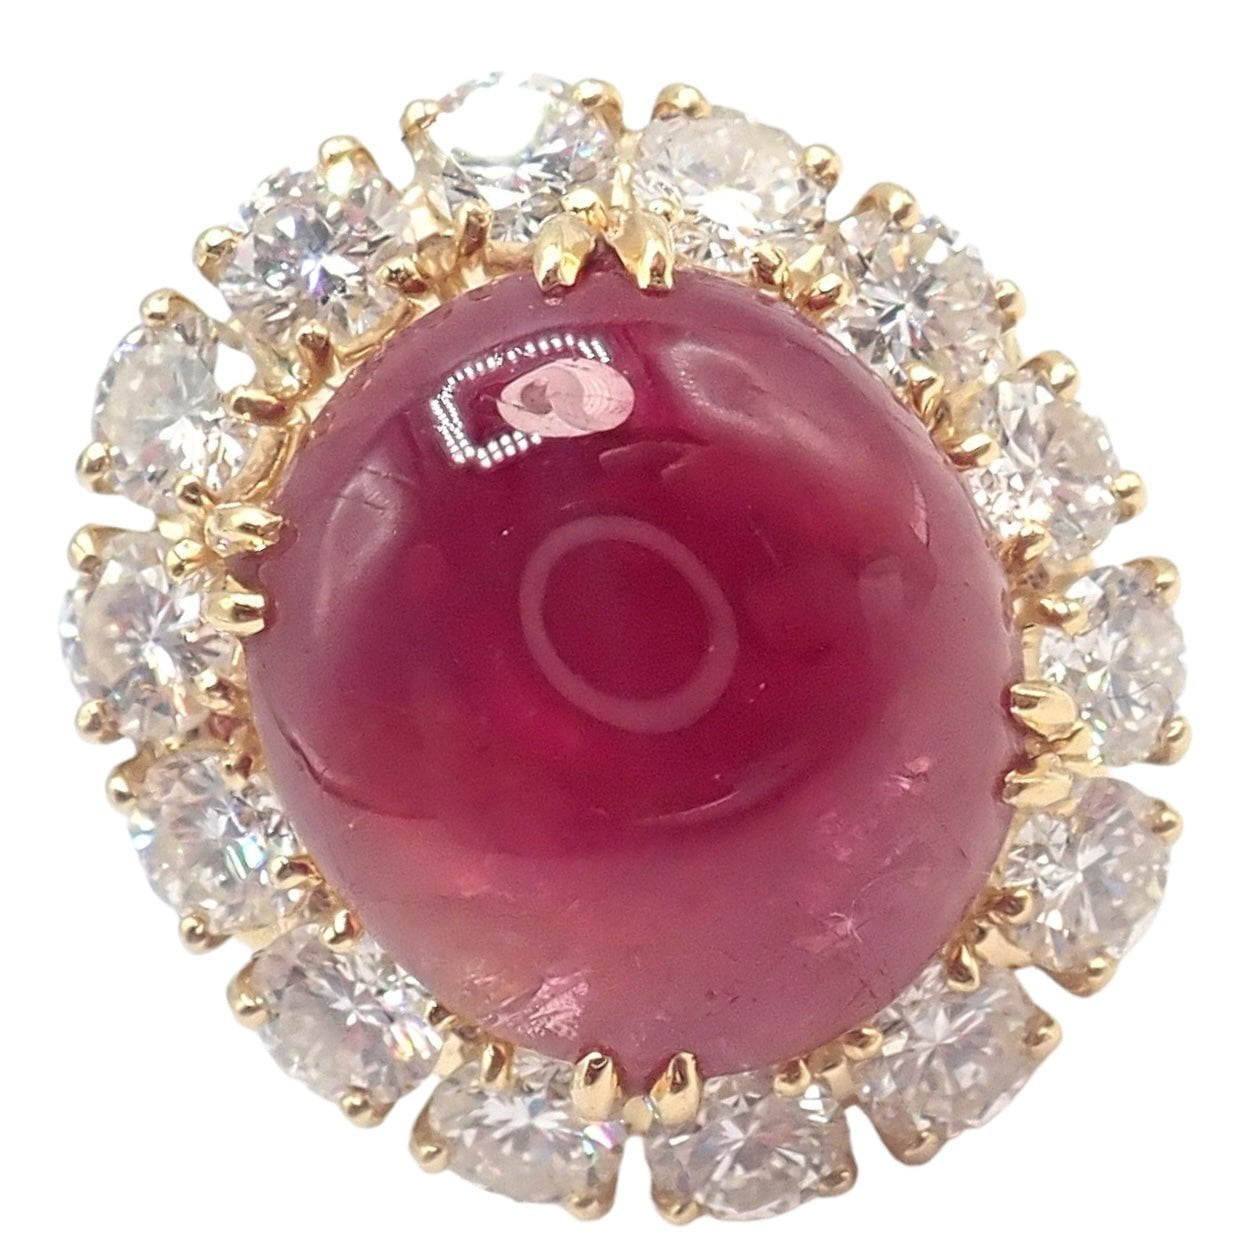 Van Cleef & Arpels Jewelry & Watches:Fine Jewelry:Rings Authentic! Van Cleef & Arpels 18k Yellow Gold Large Cabochon Ruby Diamond Ring